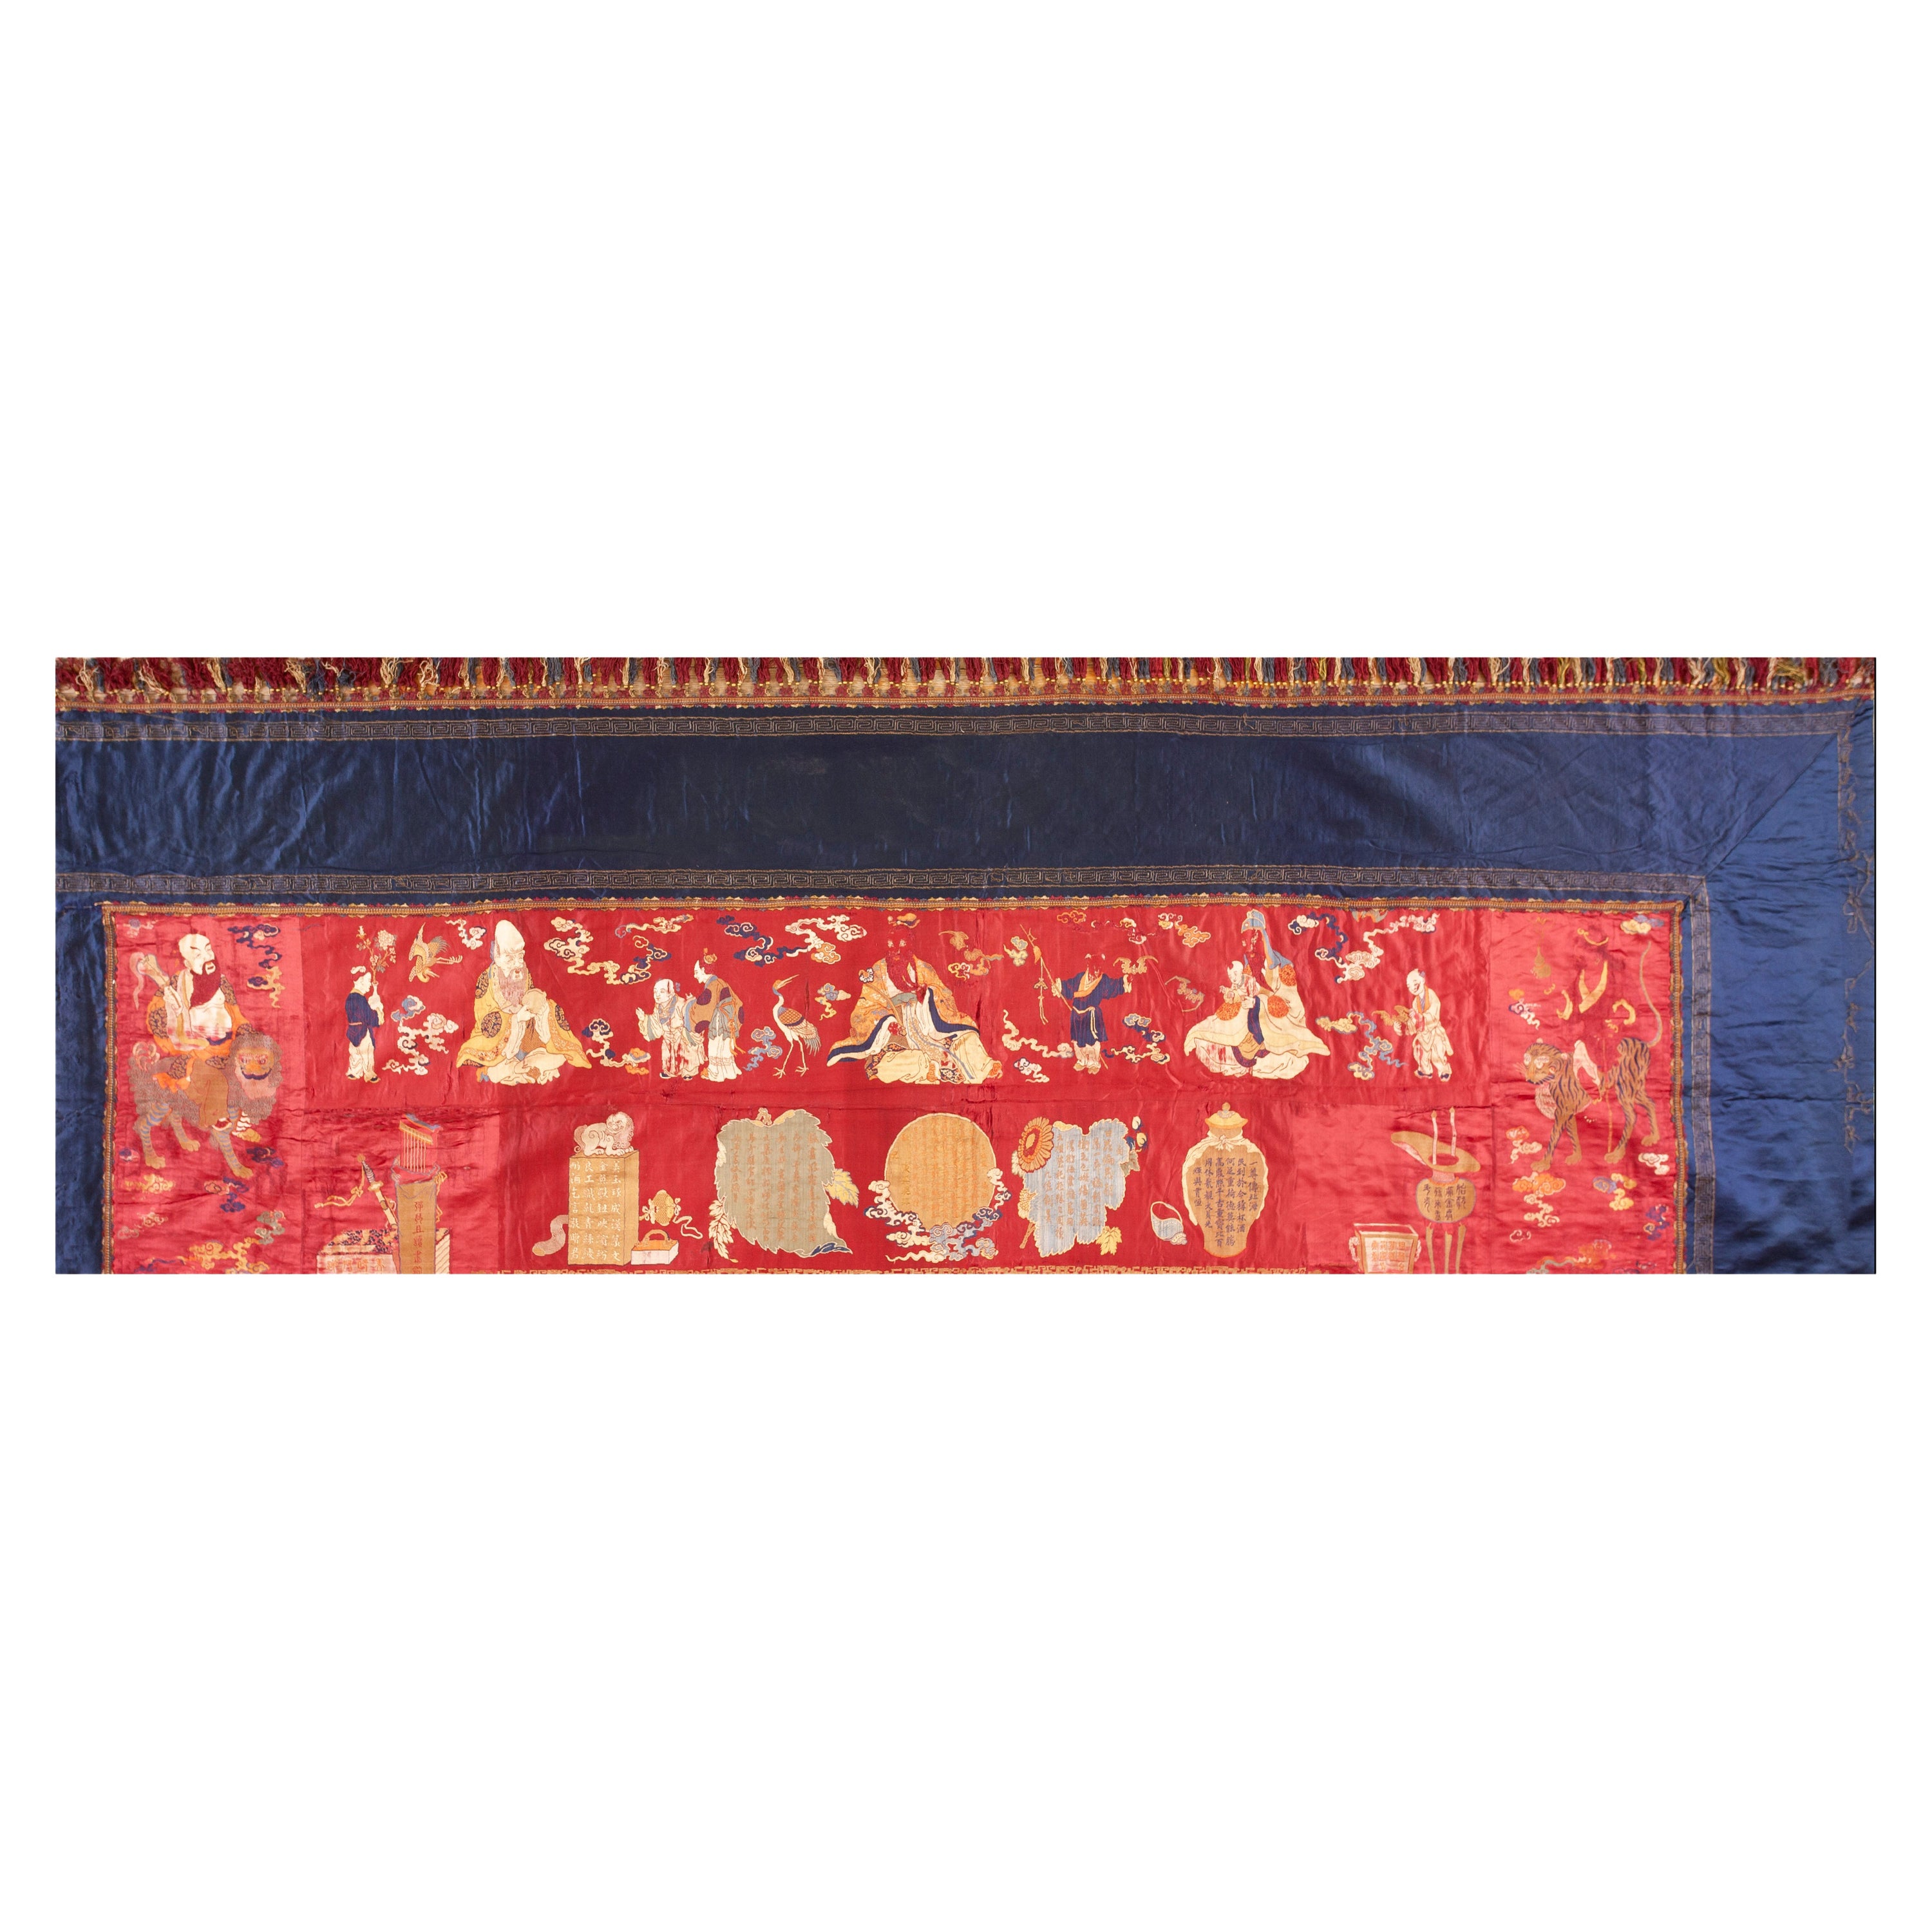 19th Century Chinese Pictorial Embroidery Textile (3' 6'' x 11' 4'' - 107 x 345) For Sale